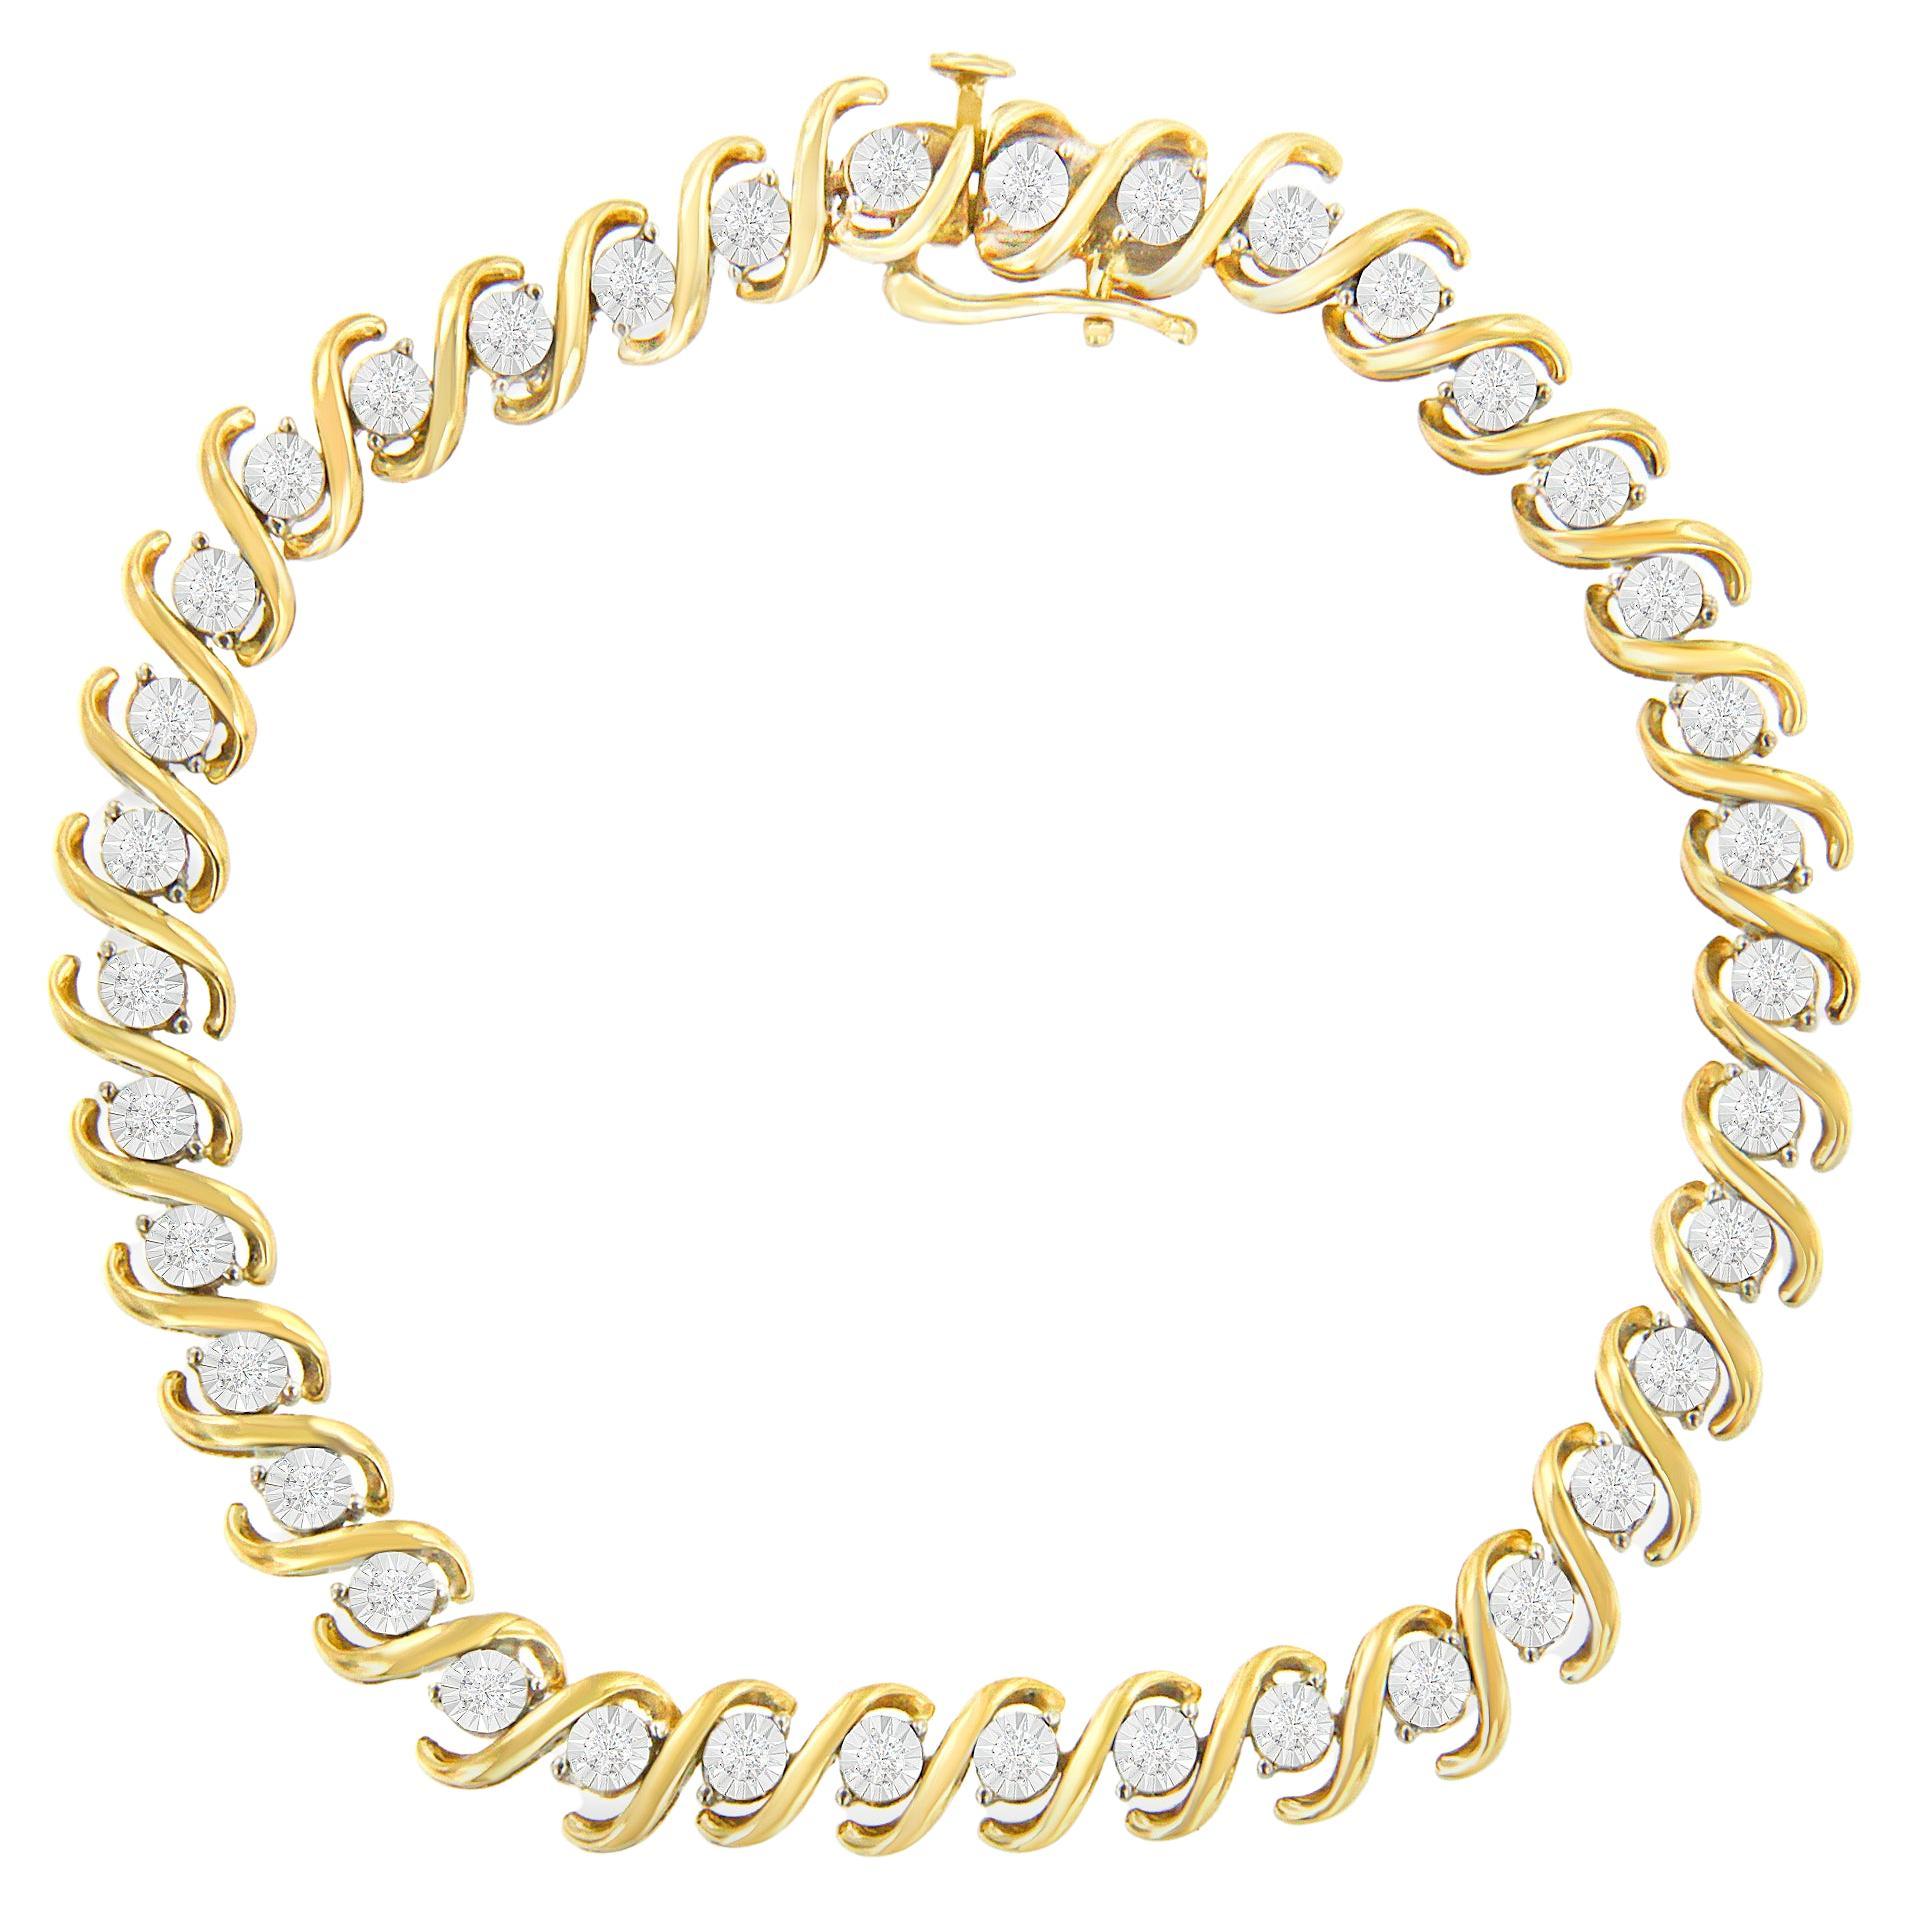 10K Yellow Gold Plated Sterling Silver Round-Cut 0.5 Carat Diamond Bracelet For Sale